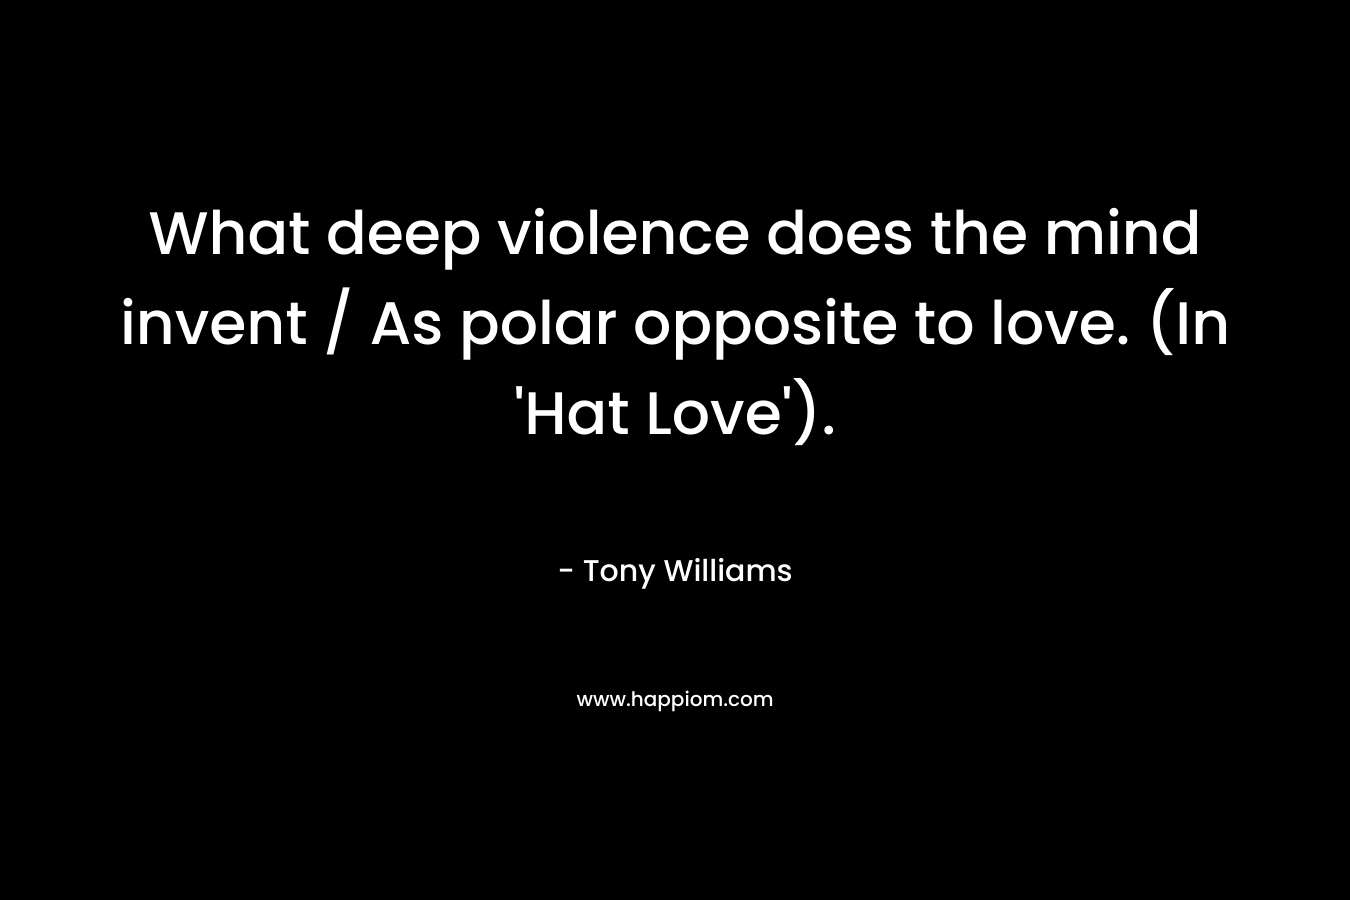 What deep violence does the mind invent / As polar opposite to love. (In ‘Hat Love’). – Tony Williams